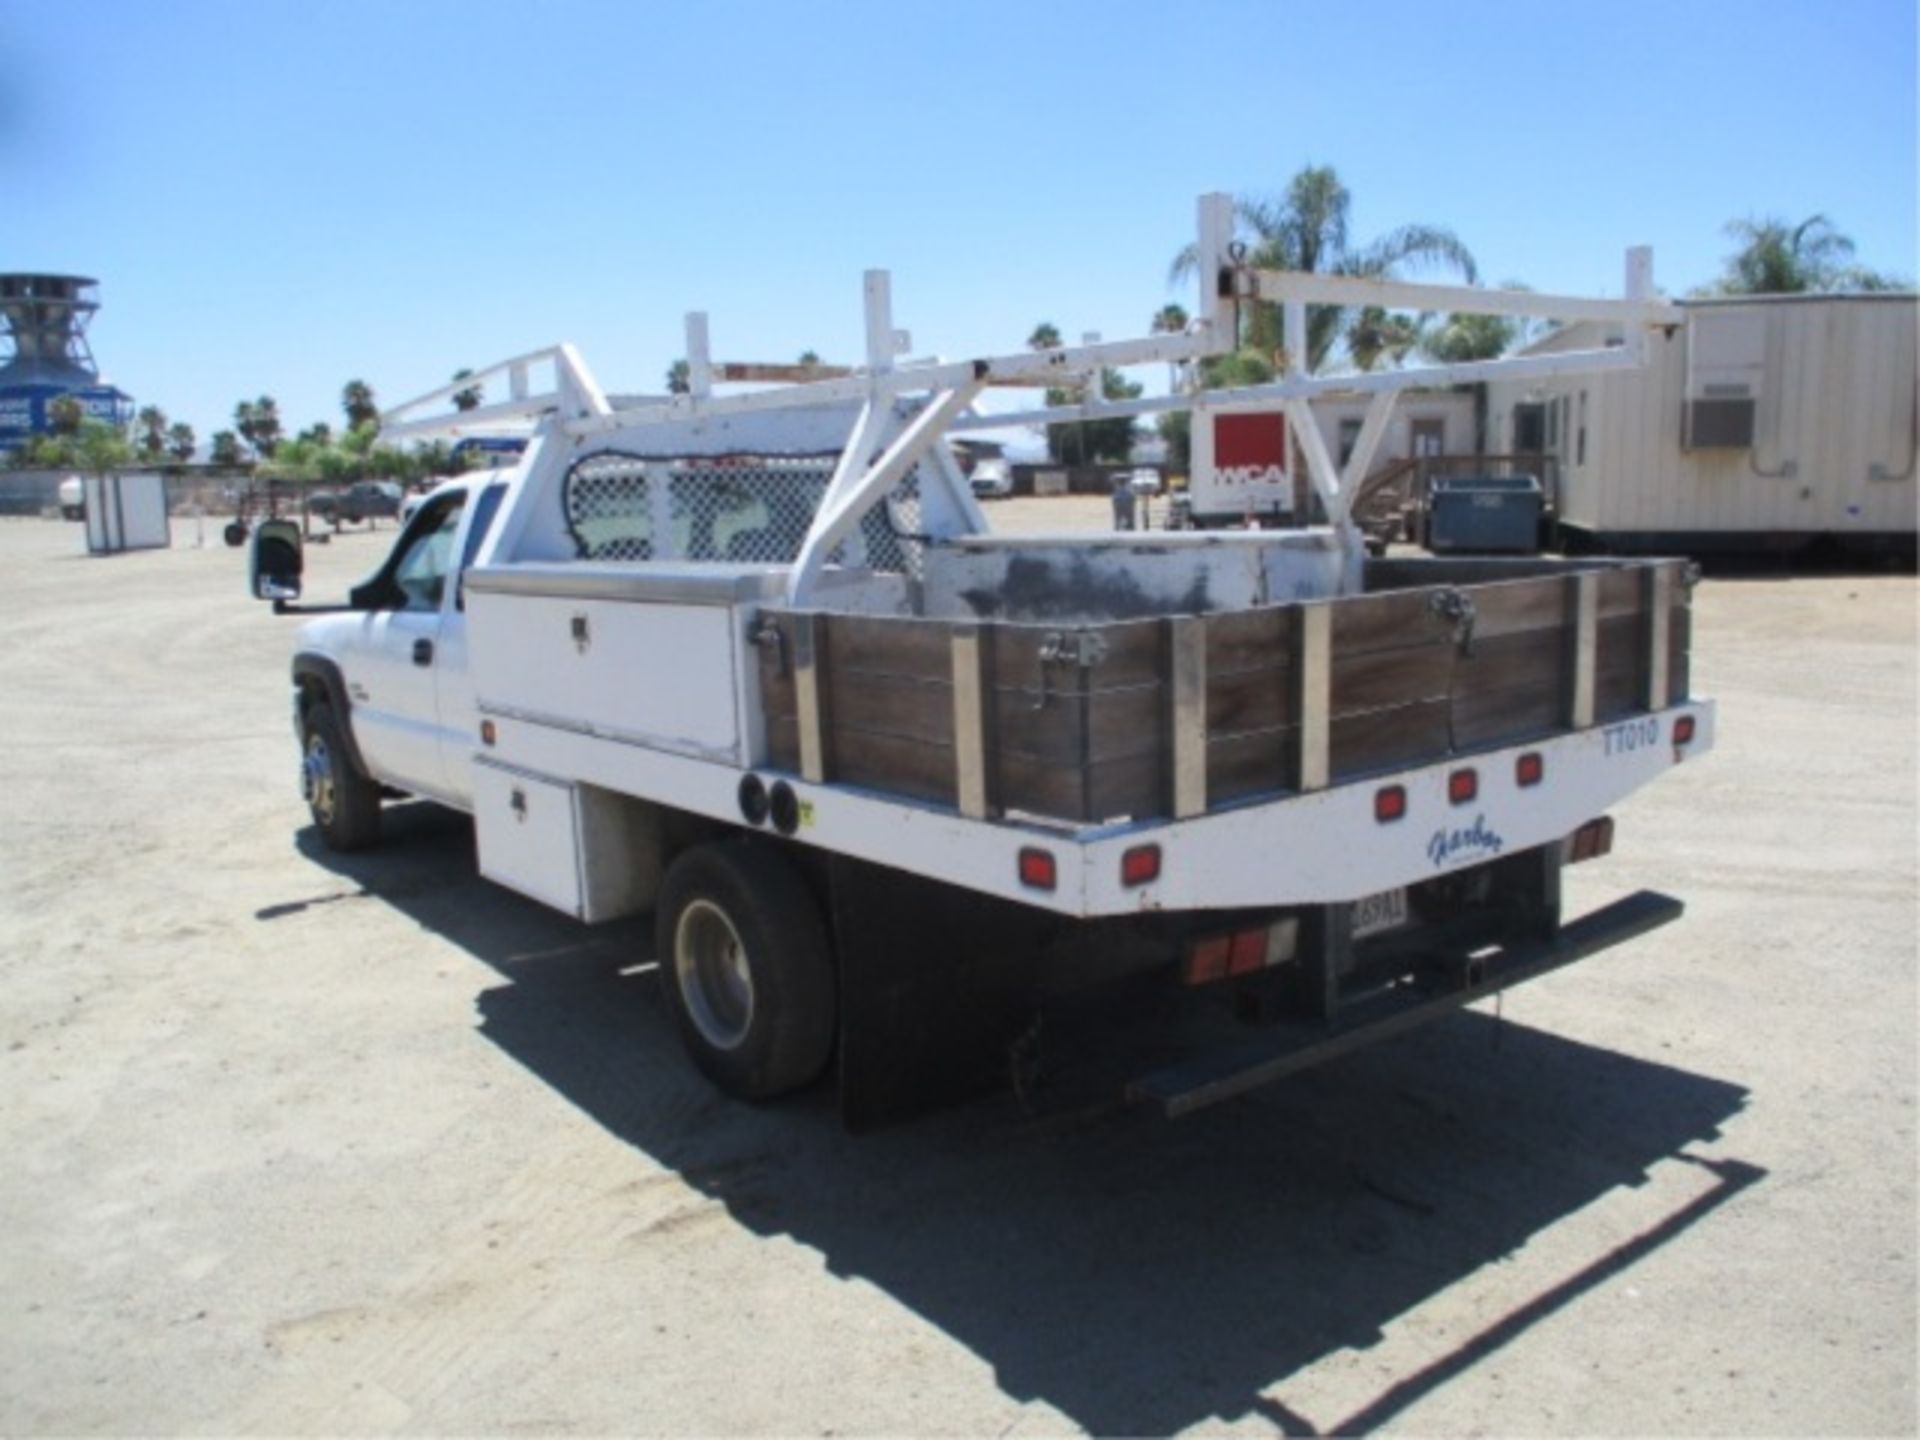 2006 Chevrolet 3500 Extended-Cab Utility Truck, 6.6L Turbo Diesel, Automatic, Tool Boxes, Lumber - Image 21 of 71